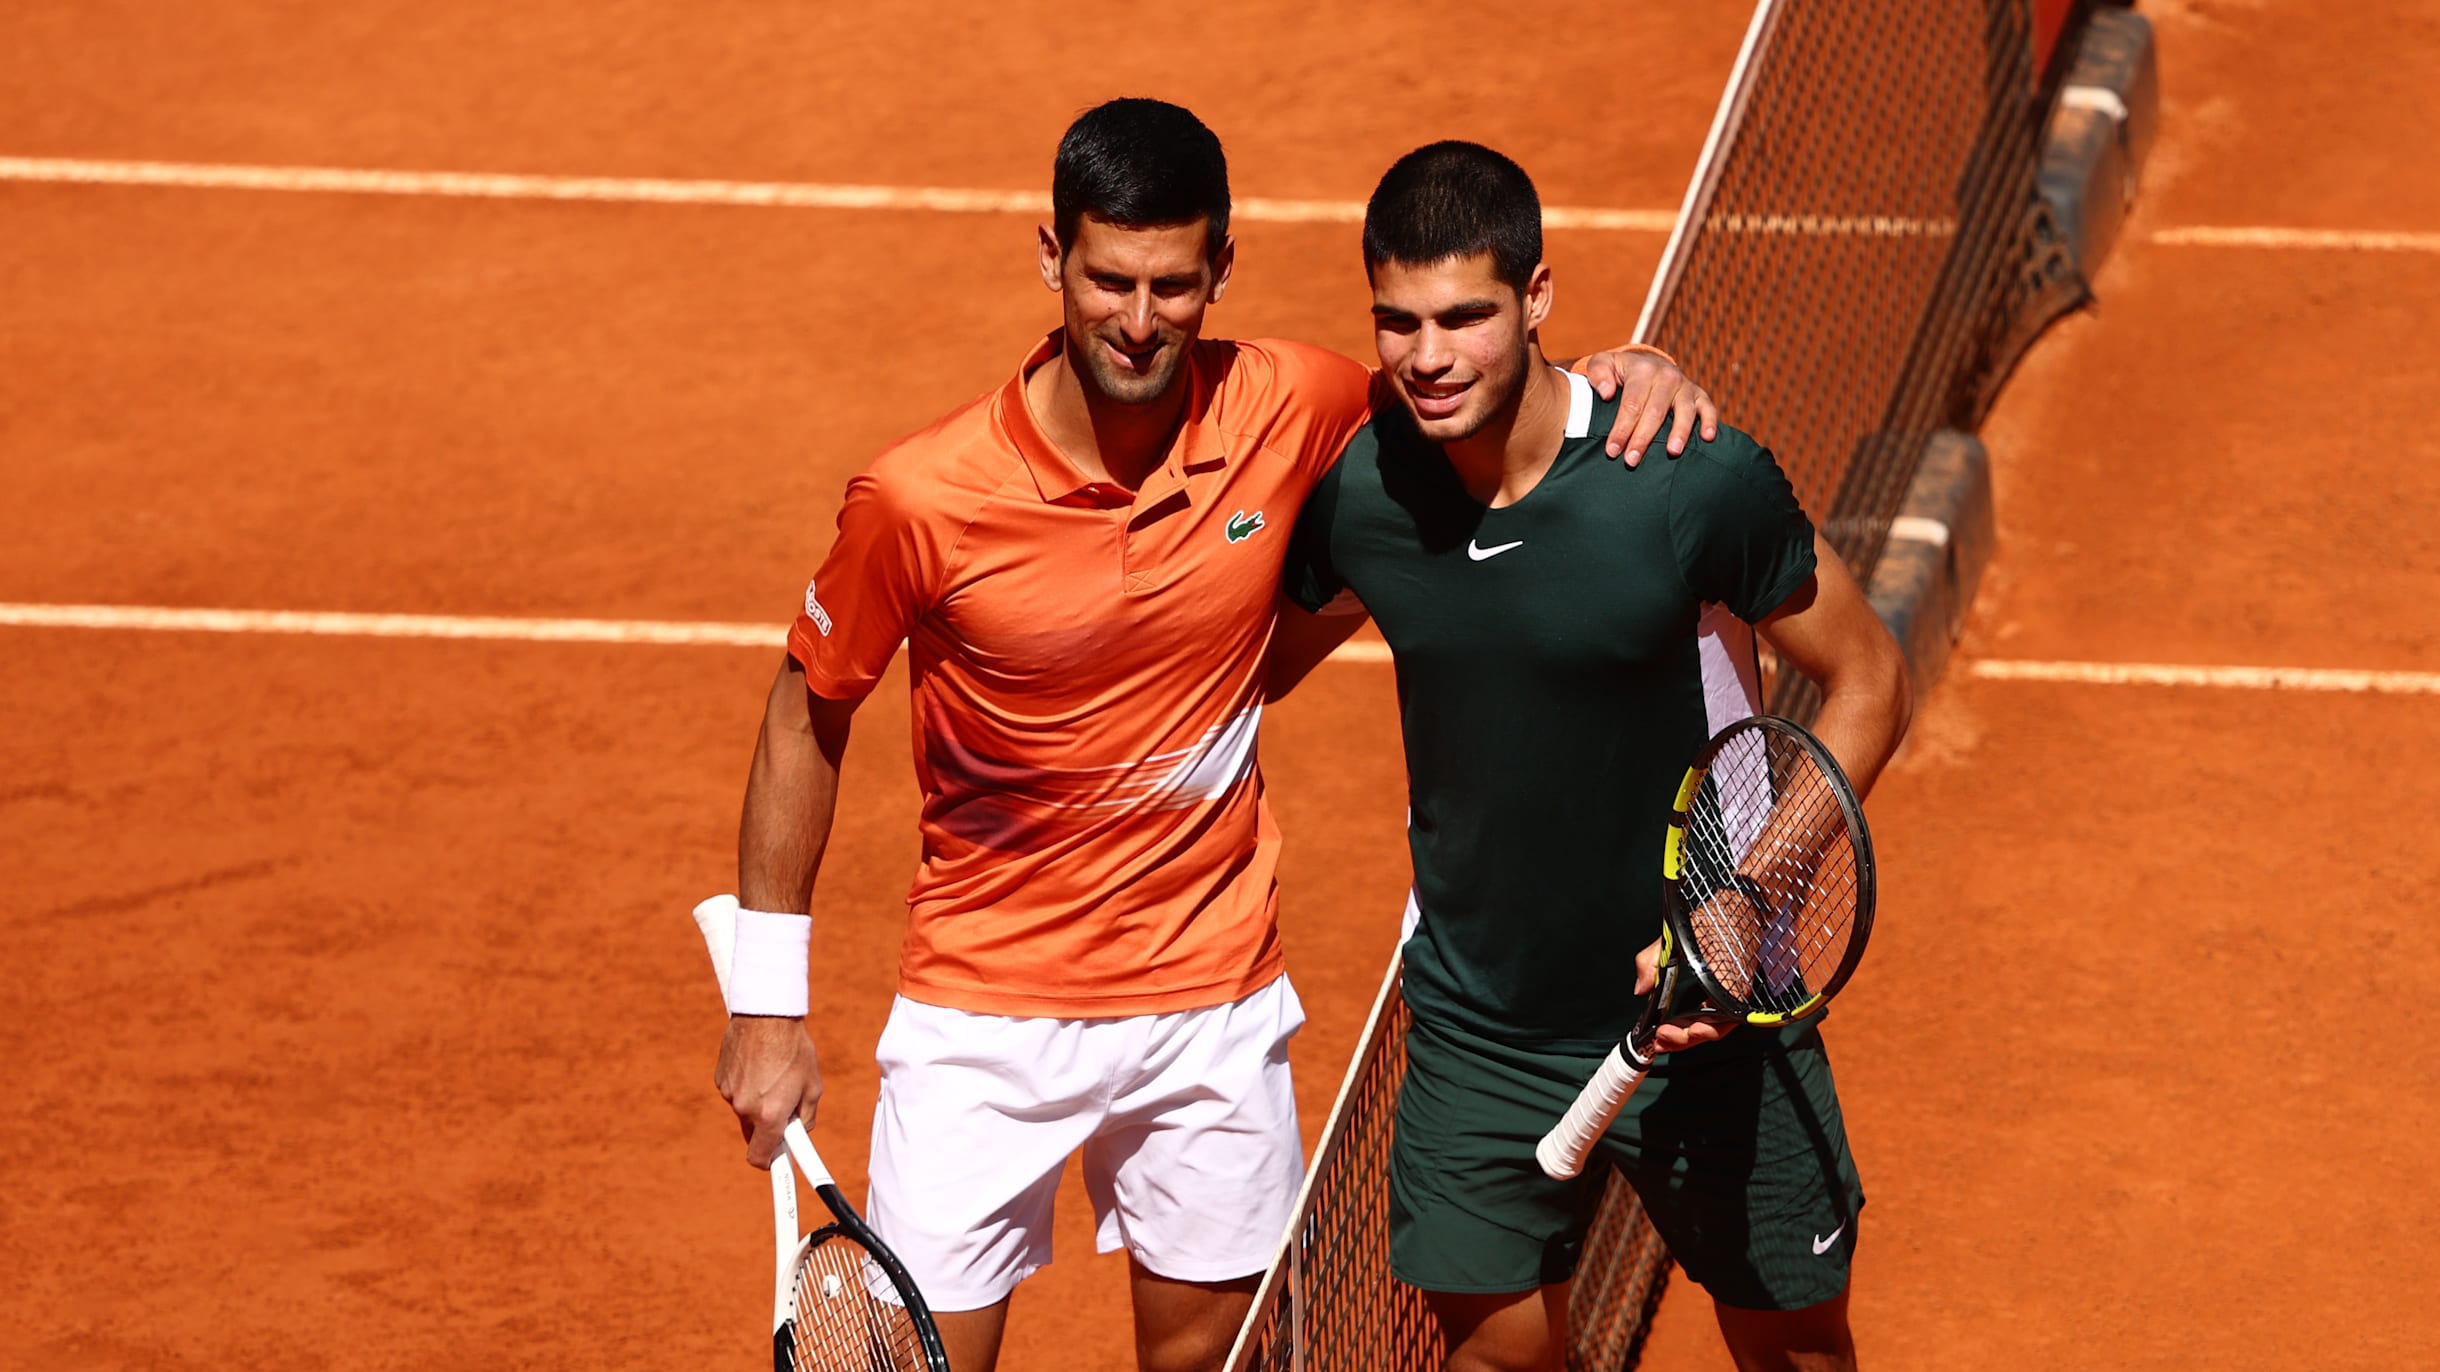 Carlos Alcaraz vs Novak Djokovic, French Open 2023 tennis semi-finals Get schedule and watch live streaming and telecast in India